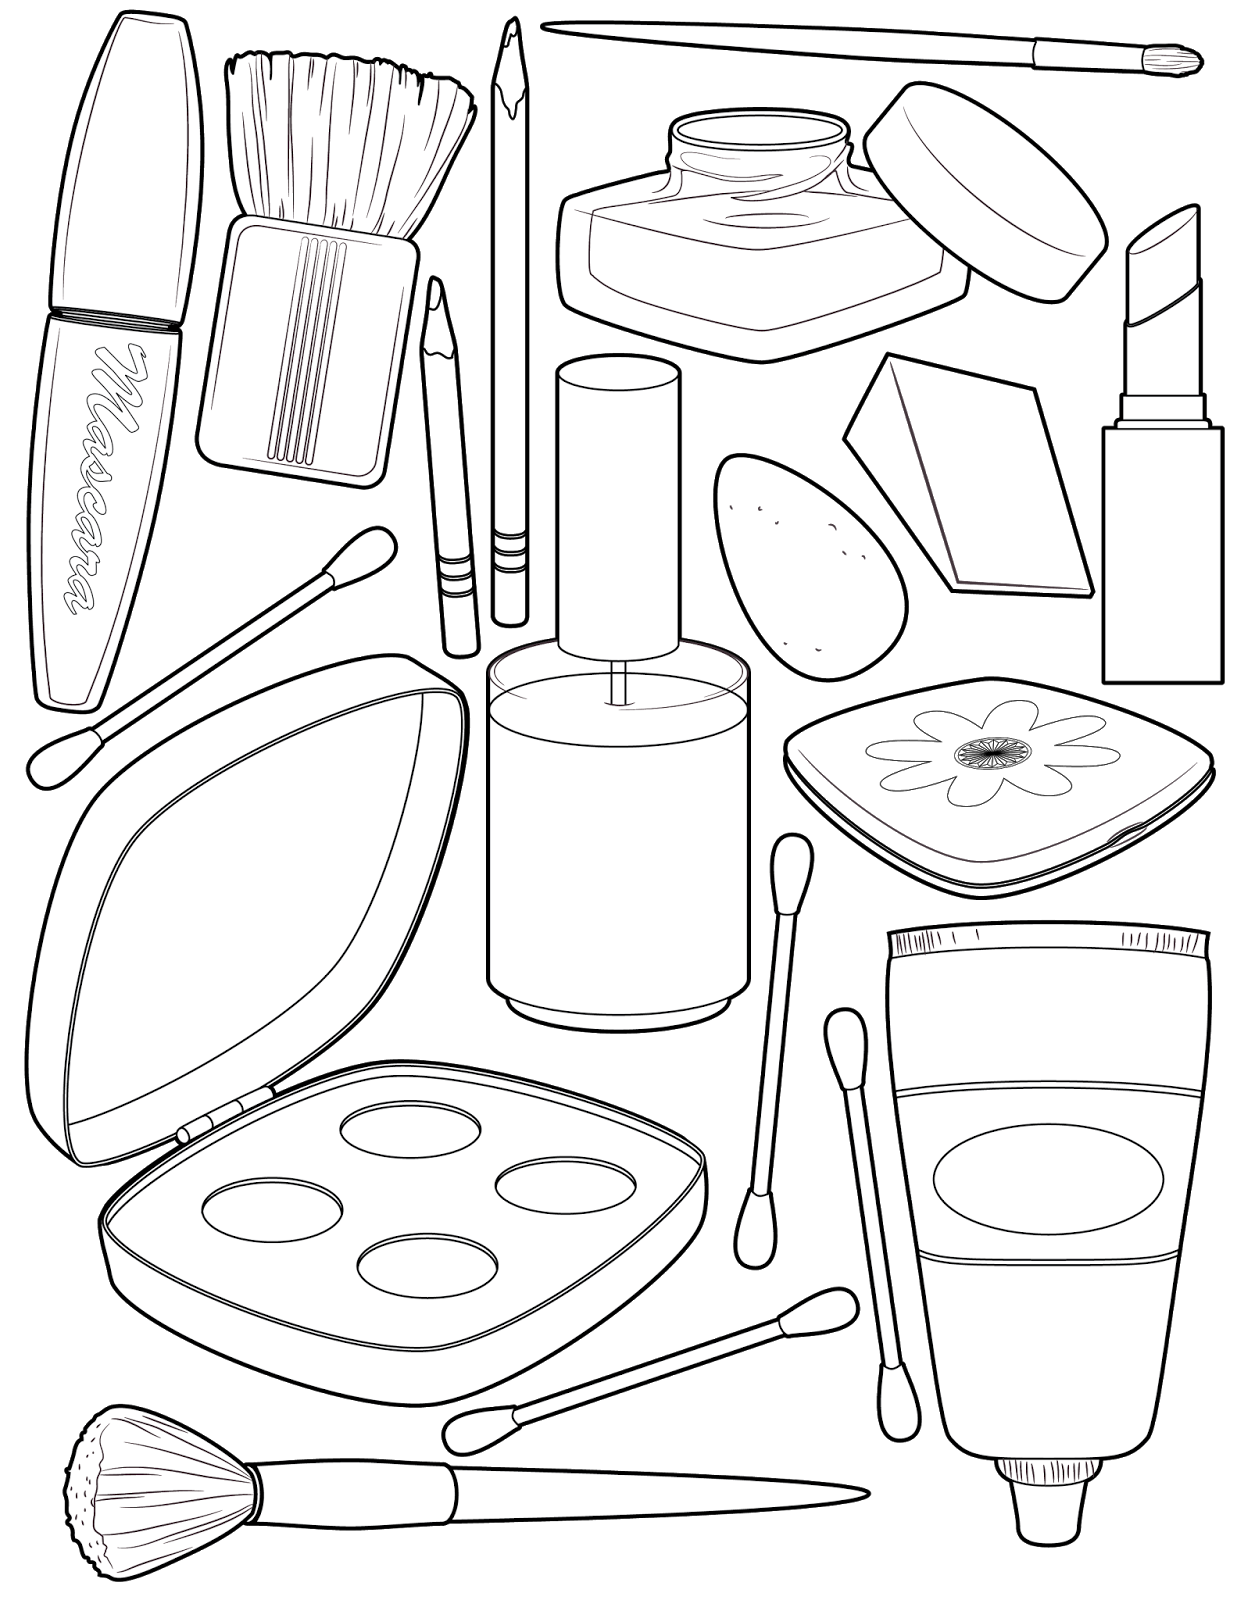 makeup-coloring-page | Coloring sheets, Coloring pages ...